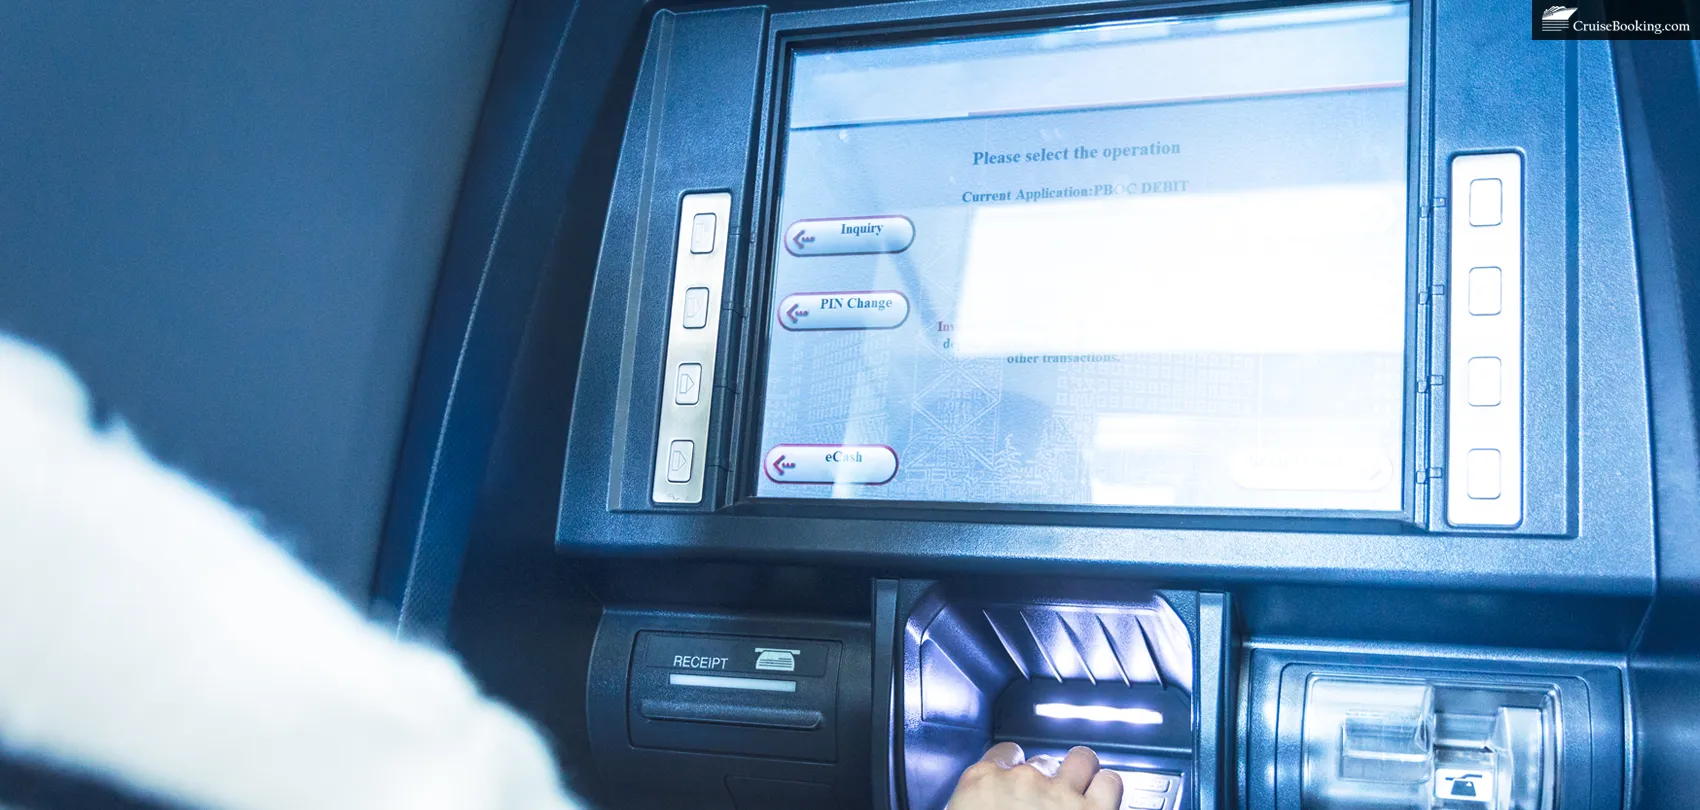 ATMs on Cruise